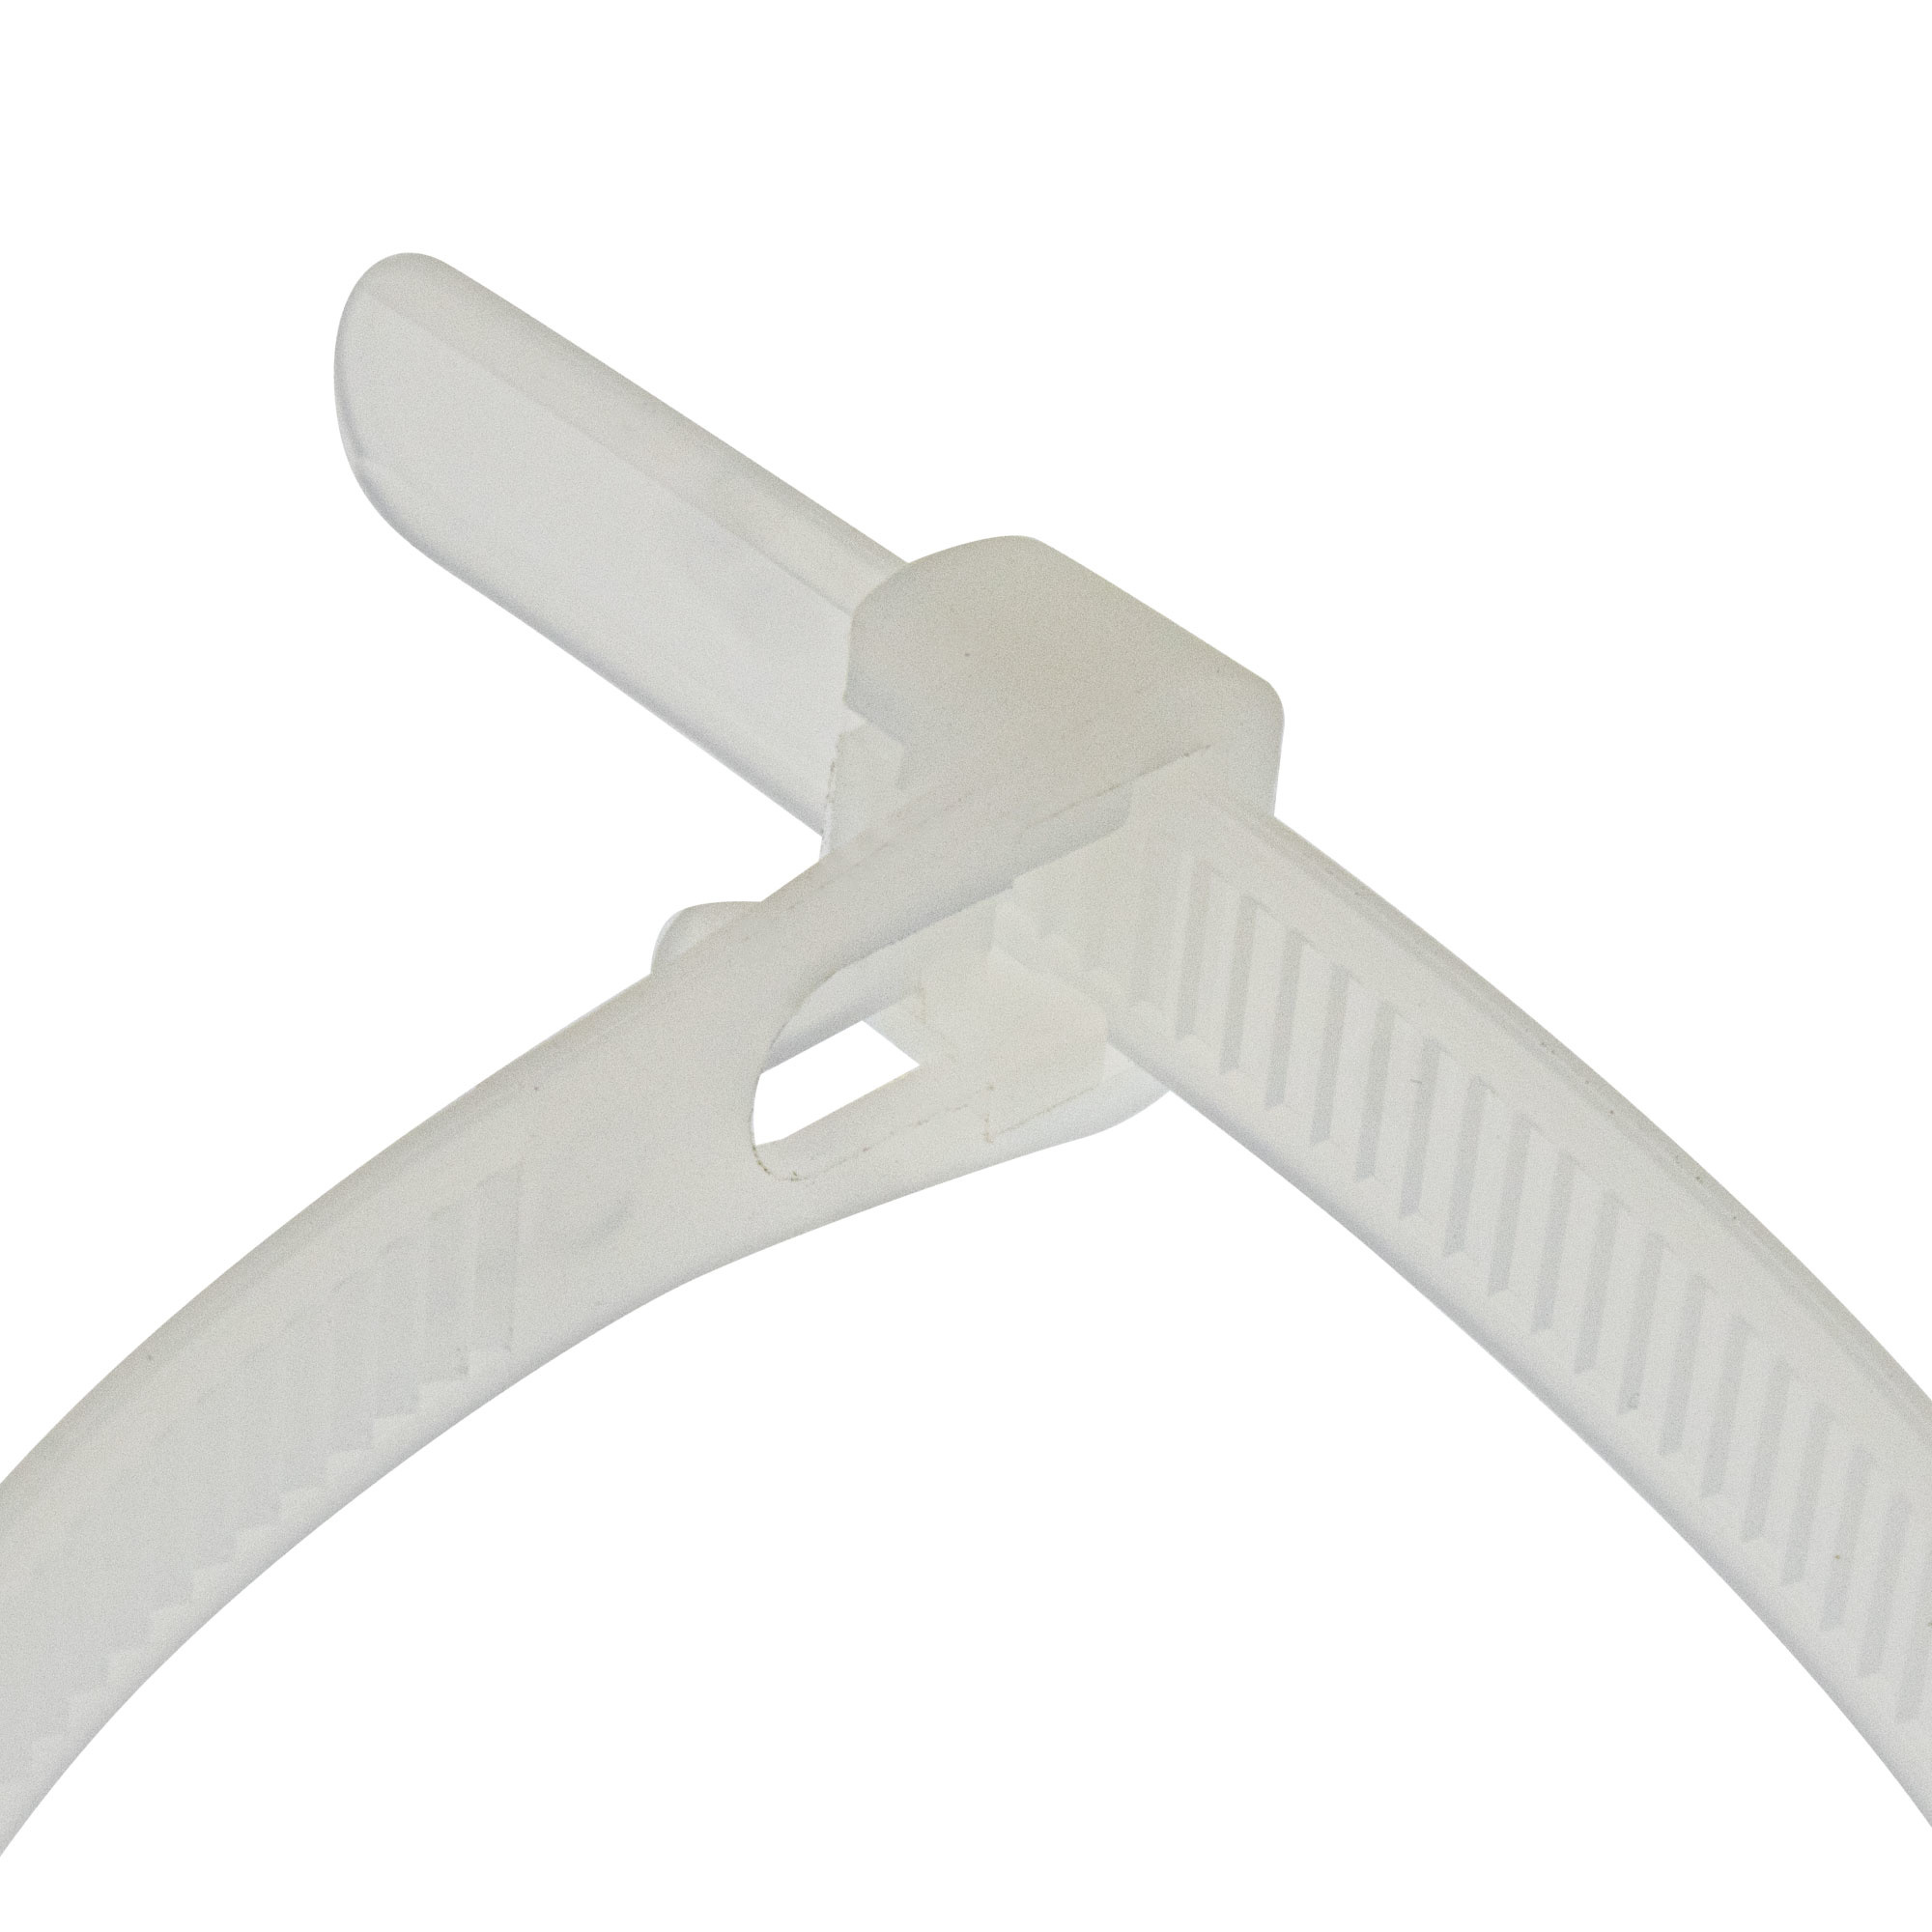 Cable tie re-use-able 200 x 4,8mm, white, 100PCS